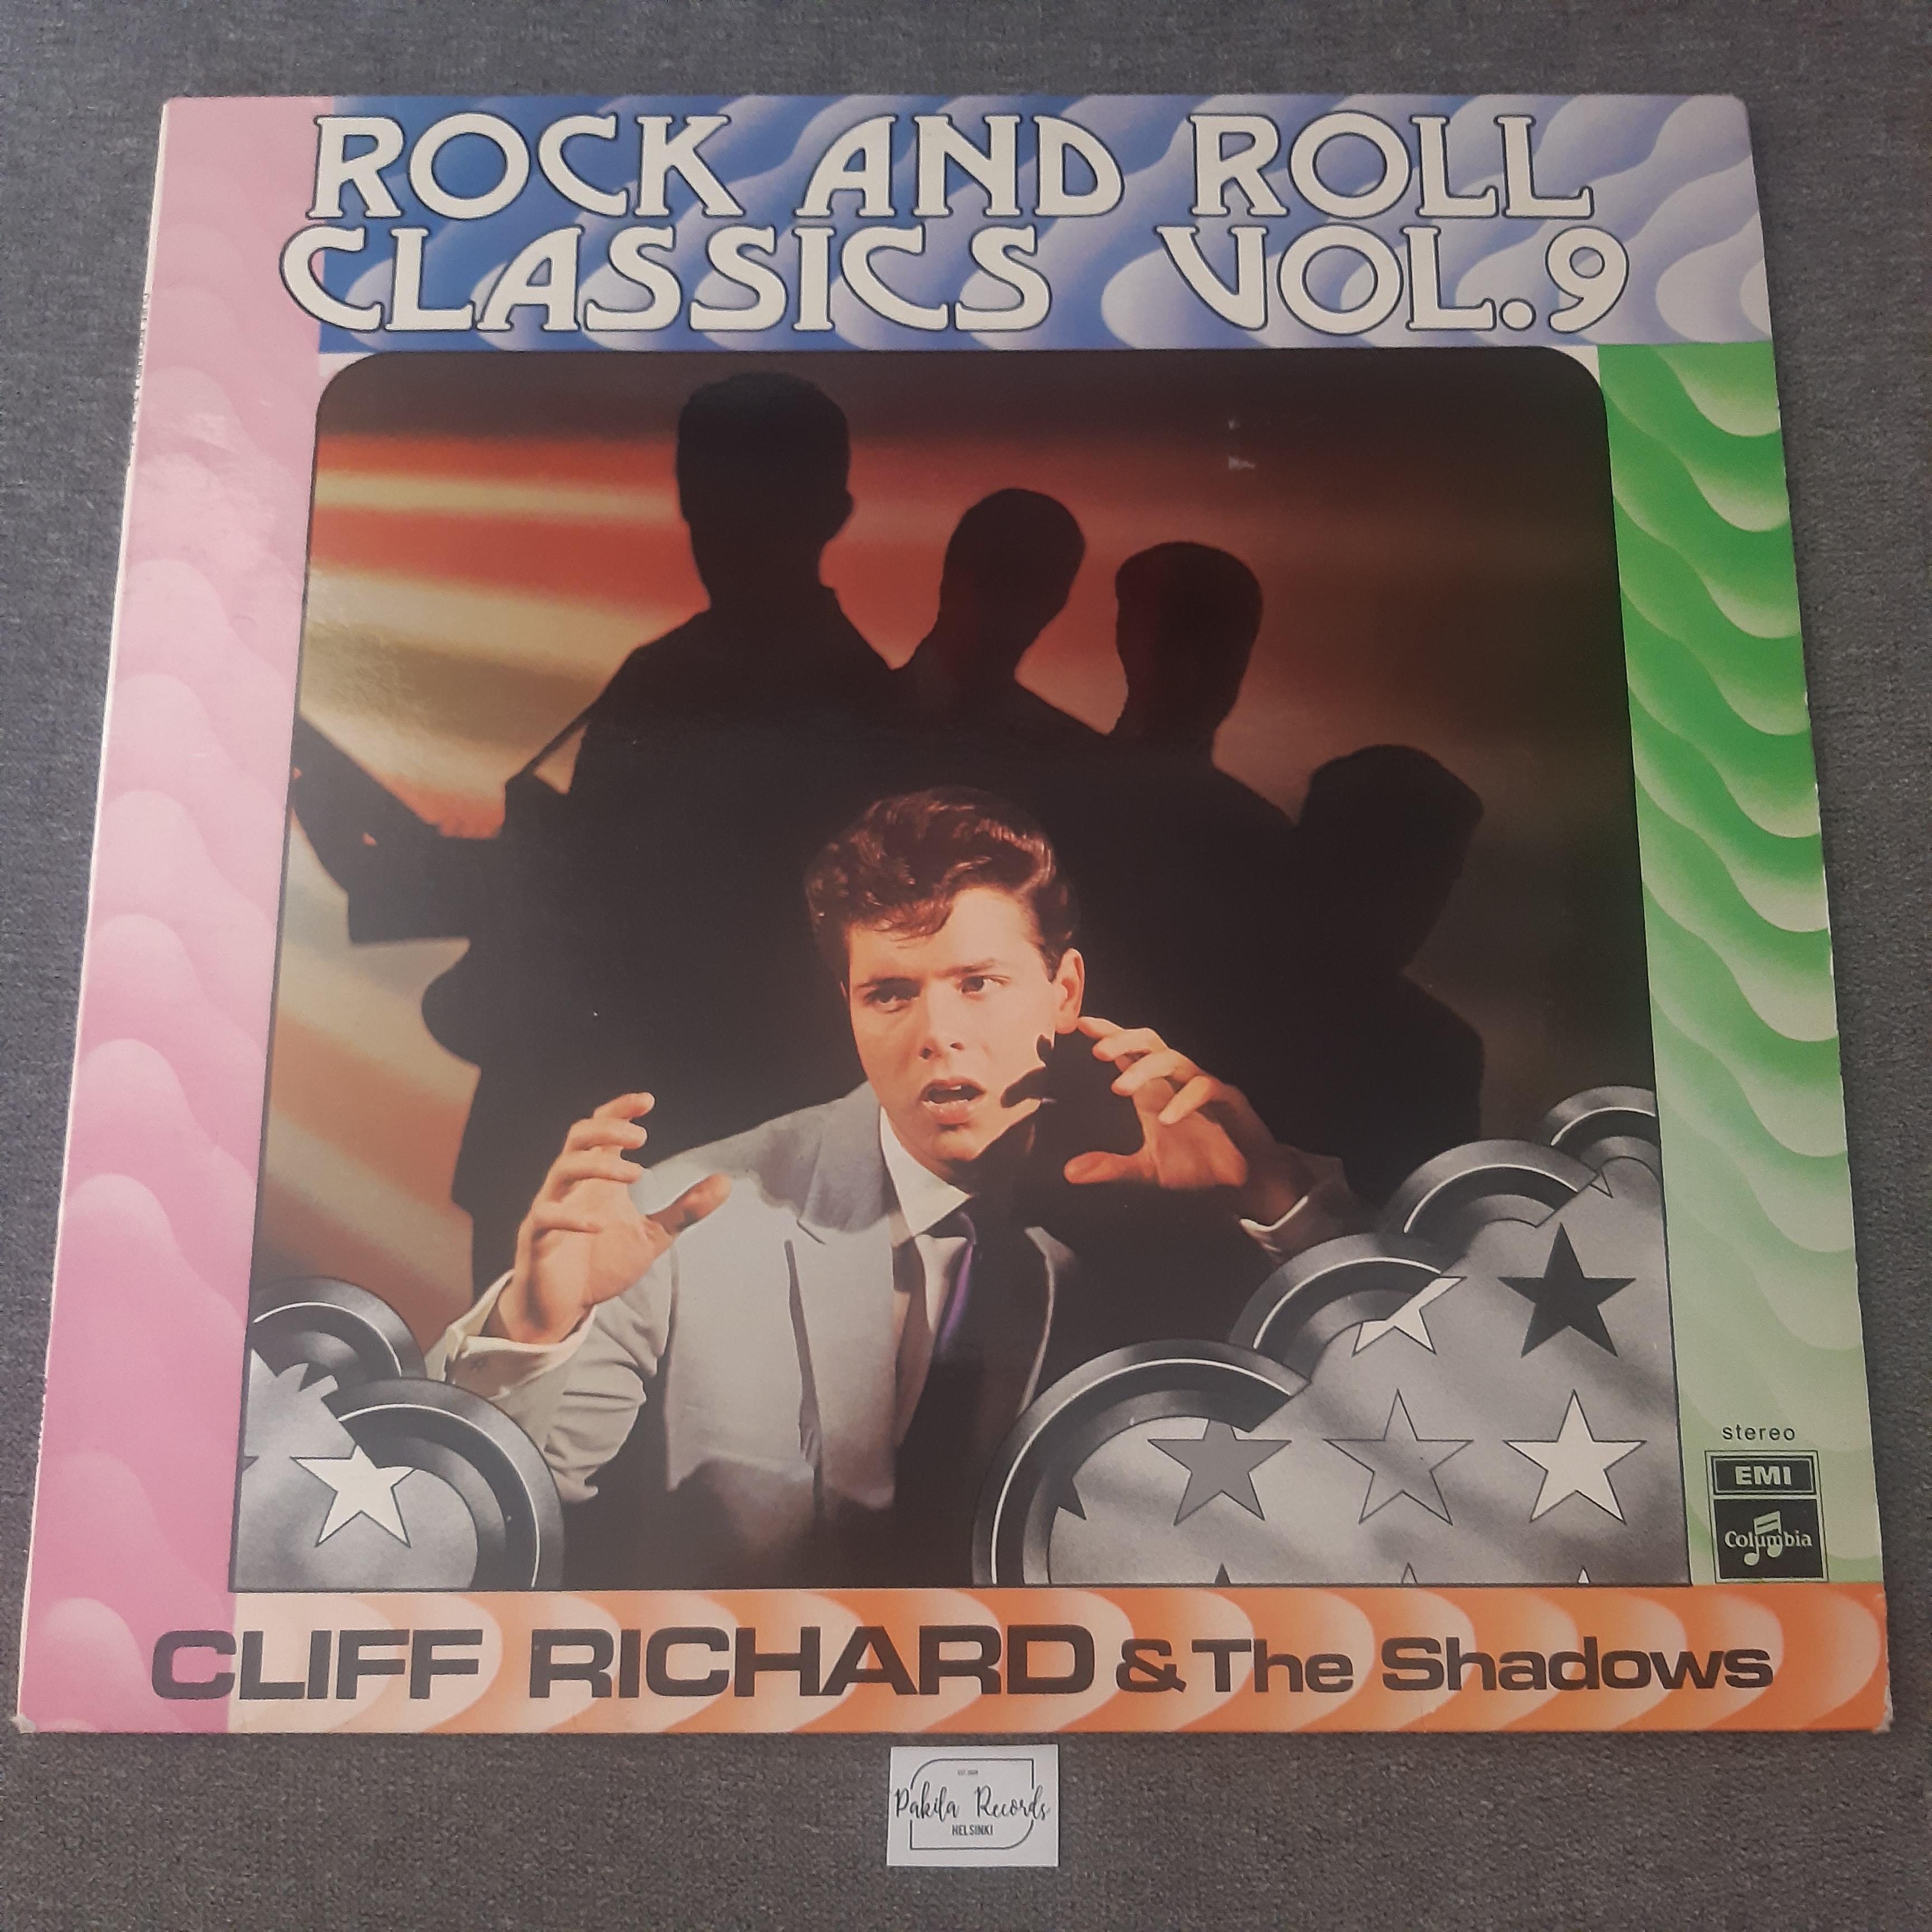 Cliff Richard And The Shadows - Rock And Roll Classics Vol. 9 - LP (käytetty)